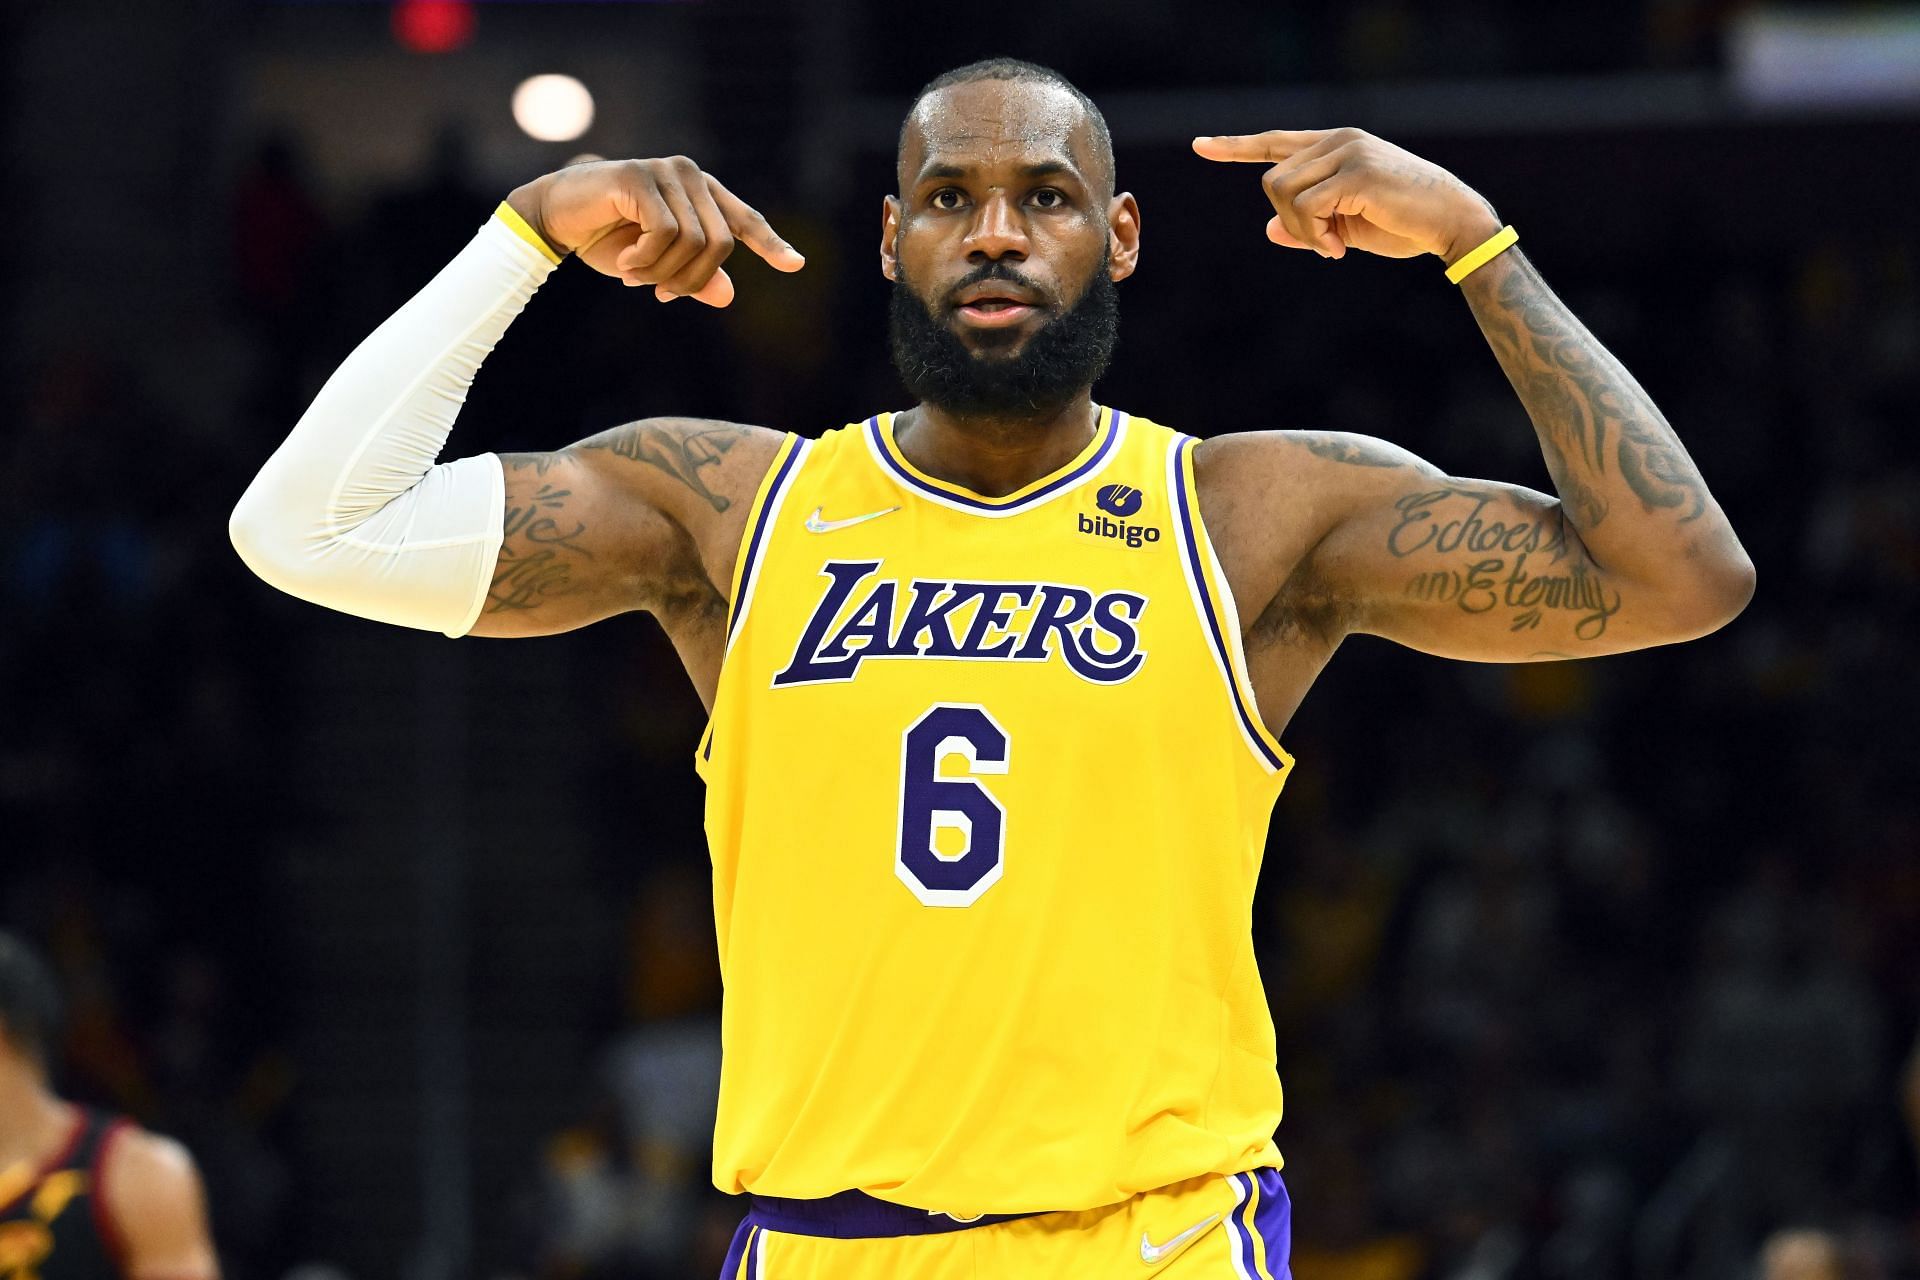 LeBron James #6 of the Los Angeles Lakers celebrates during the fourth quarter against the Cleveland Cavaliers at Rocket Mortgage Fieldhouse on March 21, 2022 in Cleveland, Ohio. The Lakers defeated the Cavaliers 131-120.